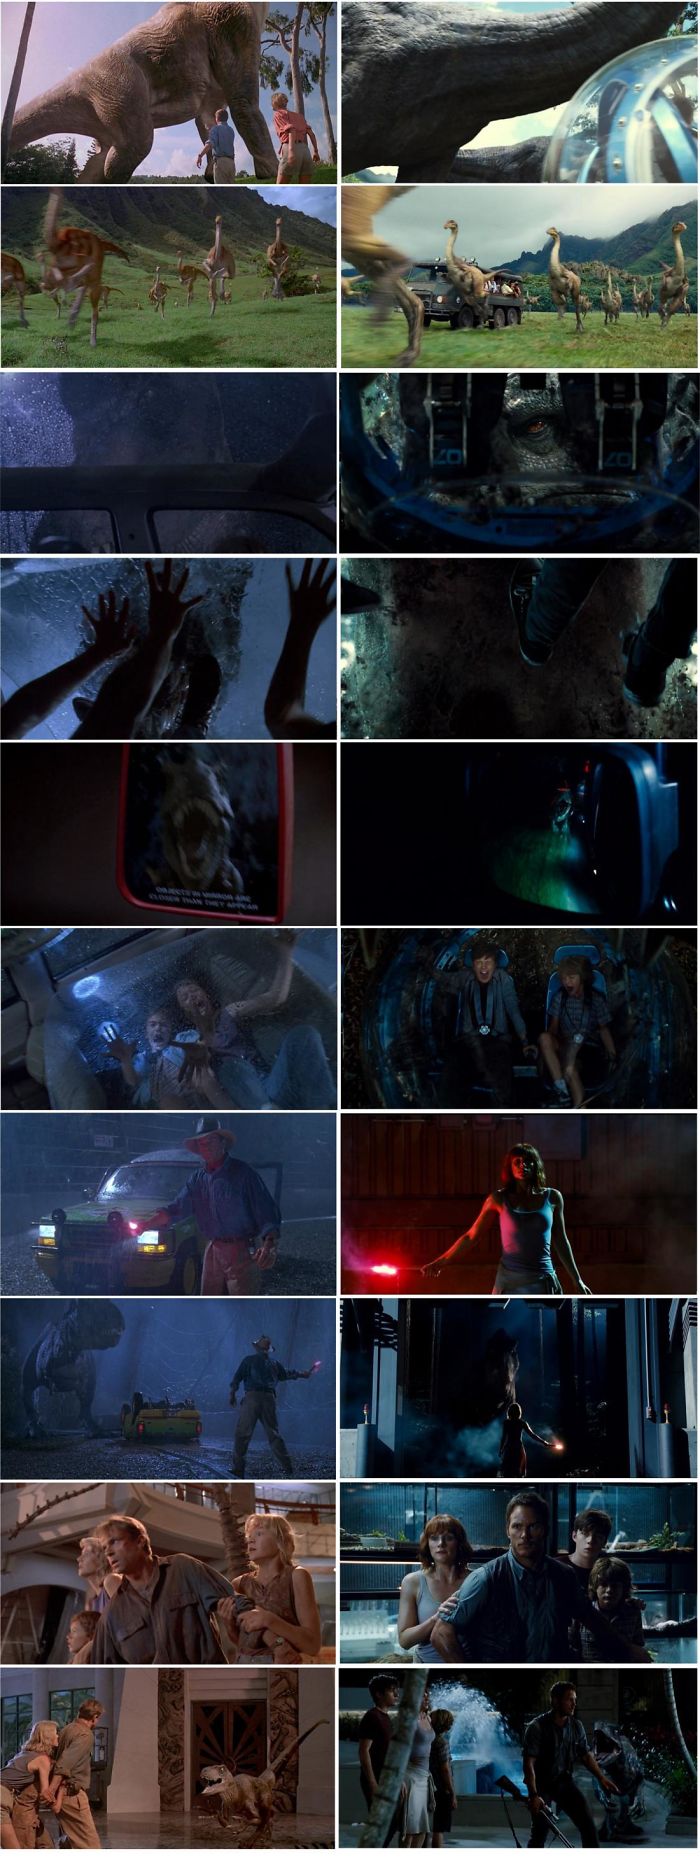 A List To All The Visual References That Jurassic World (2015) Did To Jurassic Park (1993)